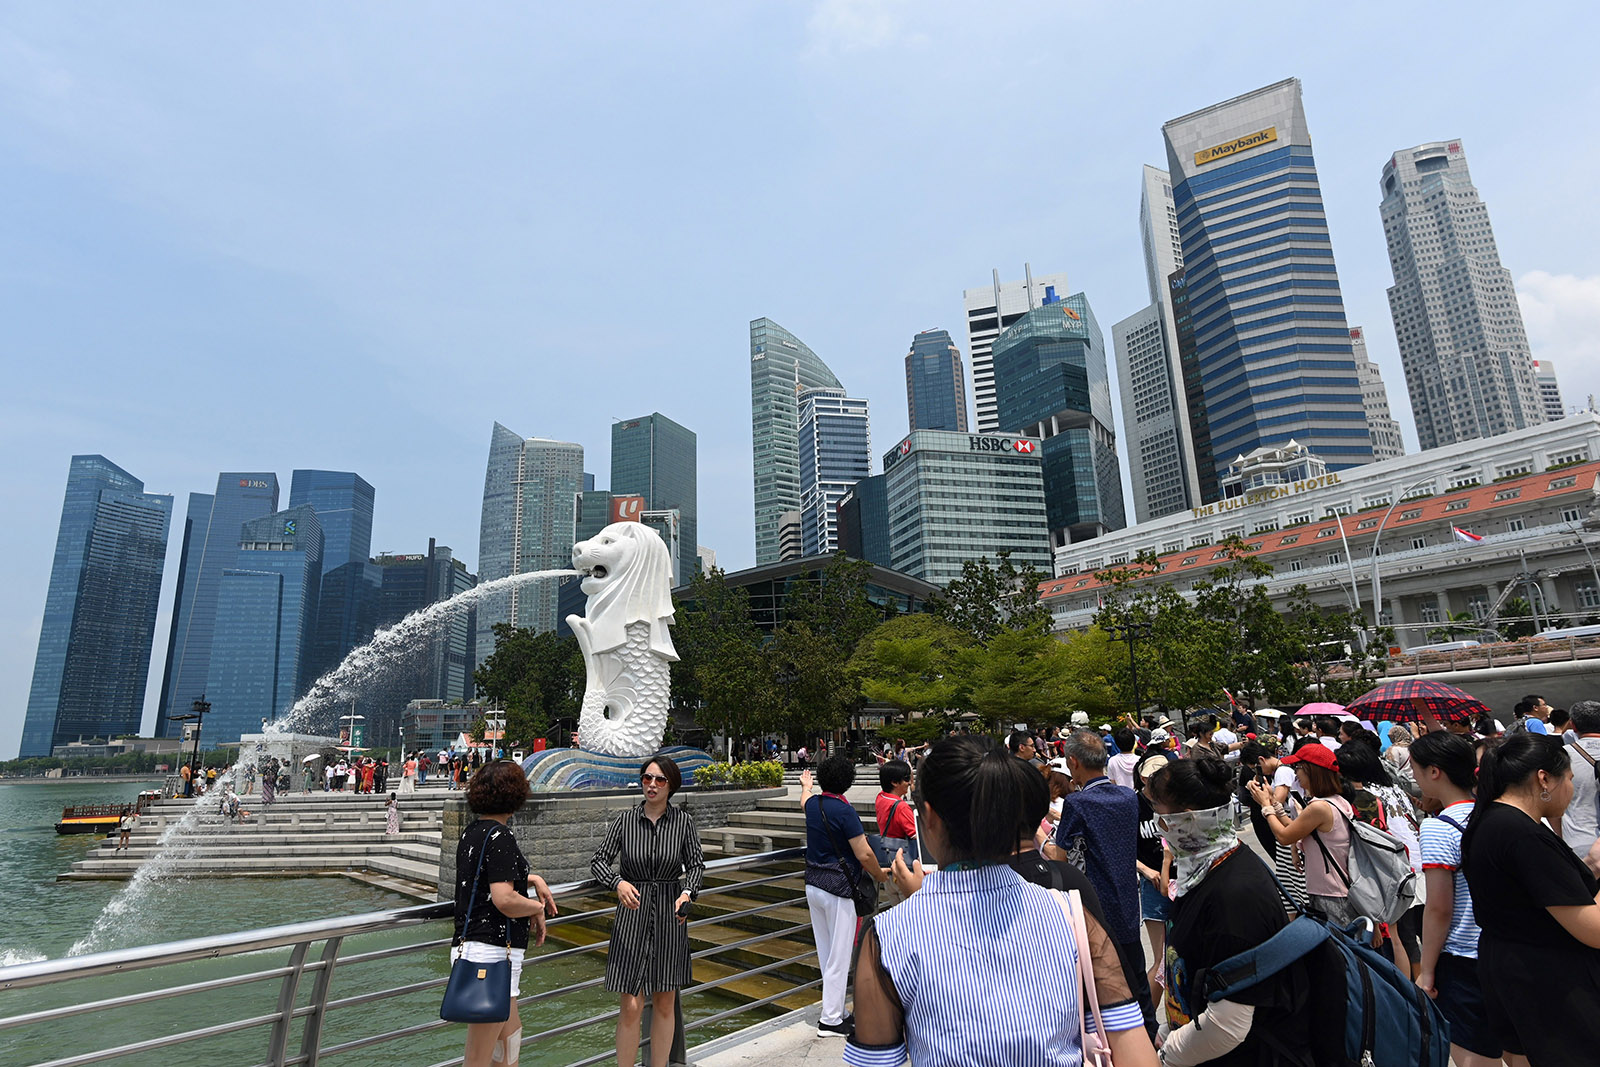 Visitors at the Merlion park, Singapore, August 13, 2019